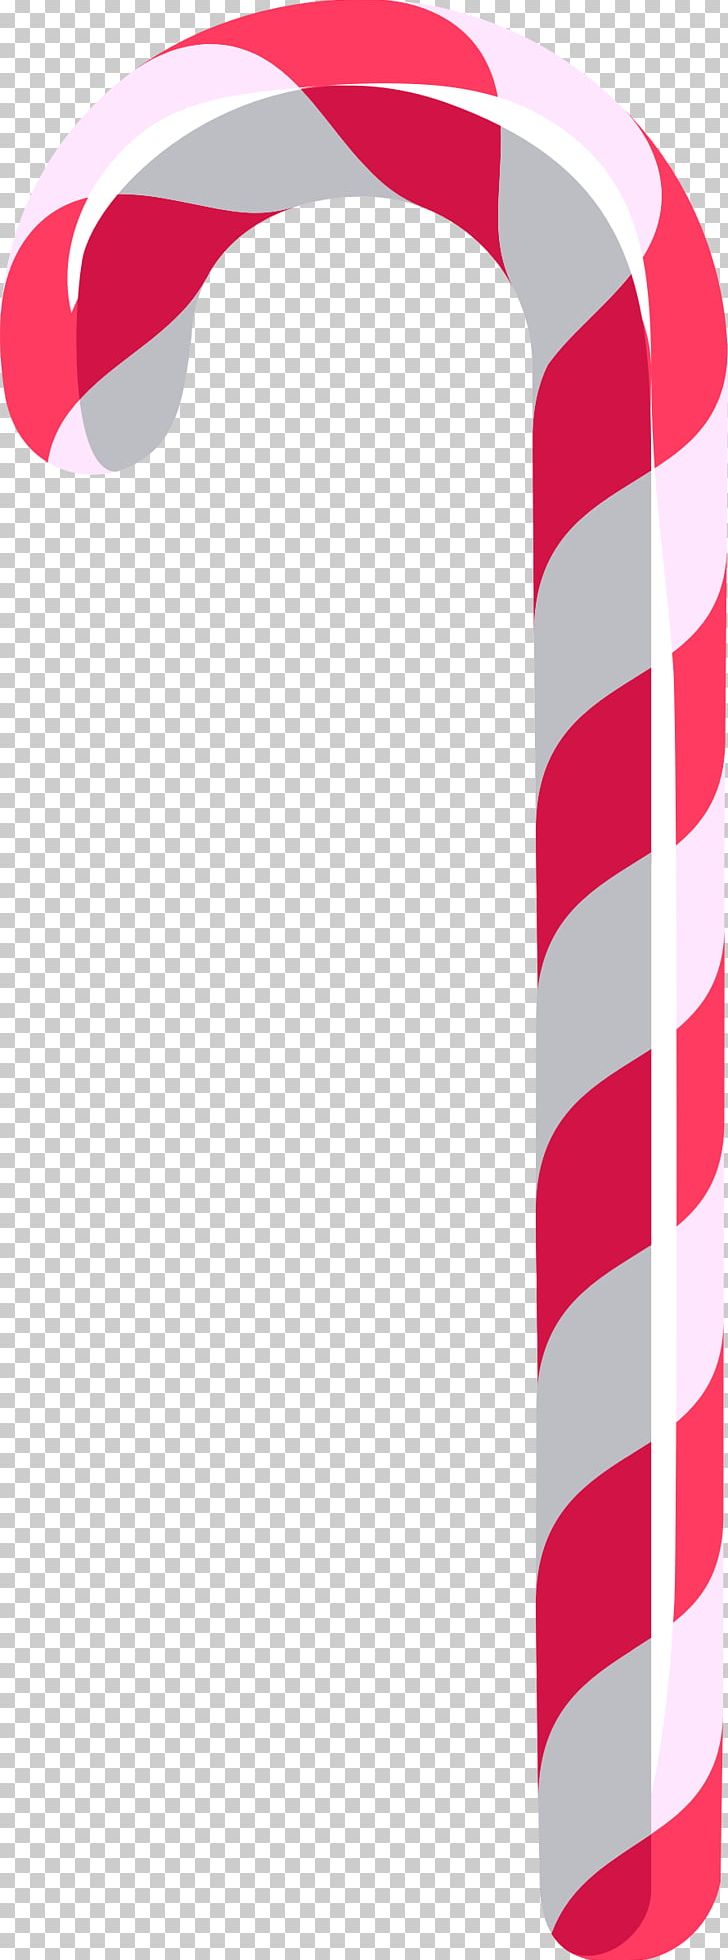 Candy Cane Stick Candy Drawing PNG, Clipart, Angle, Candy, Candy Cane, Caramel, Christmas Free PNG Download